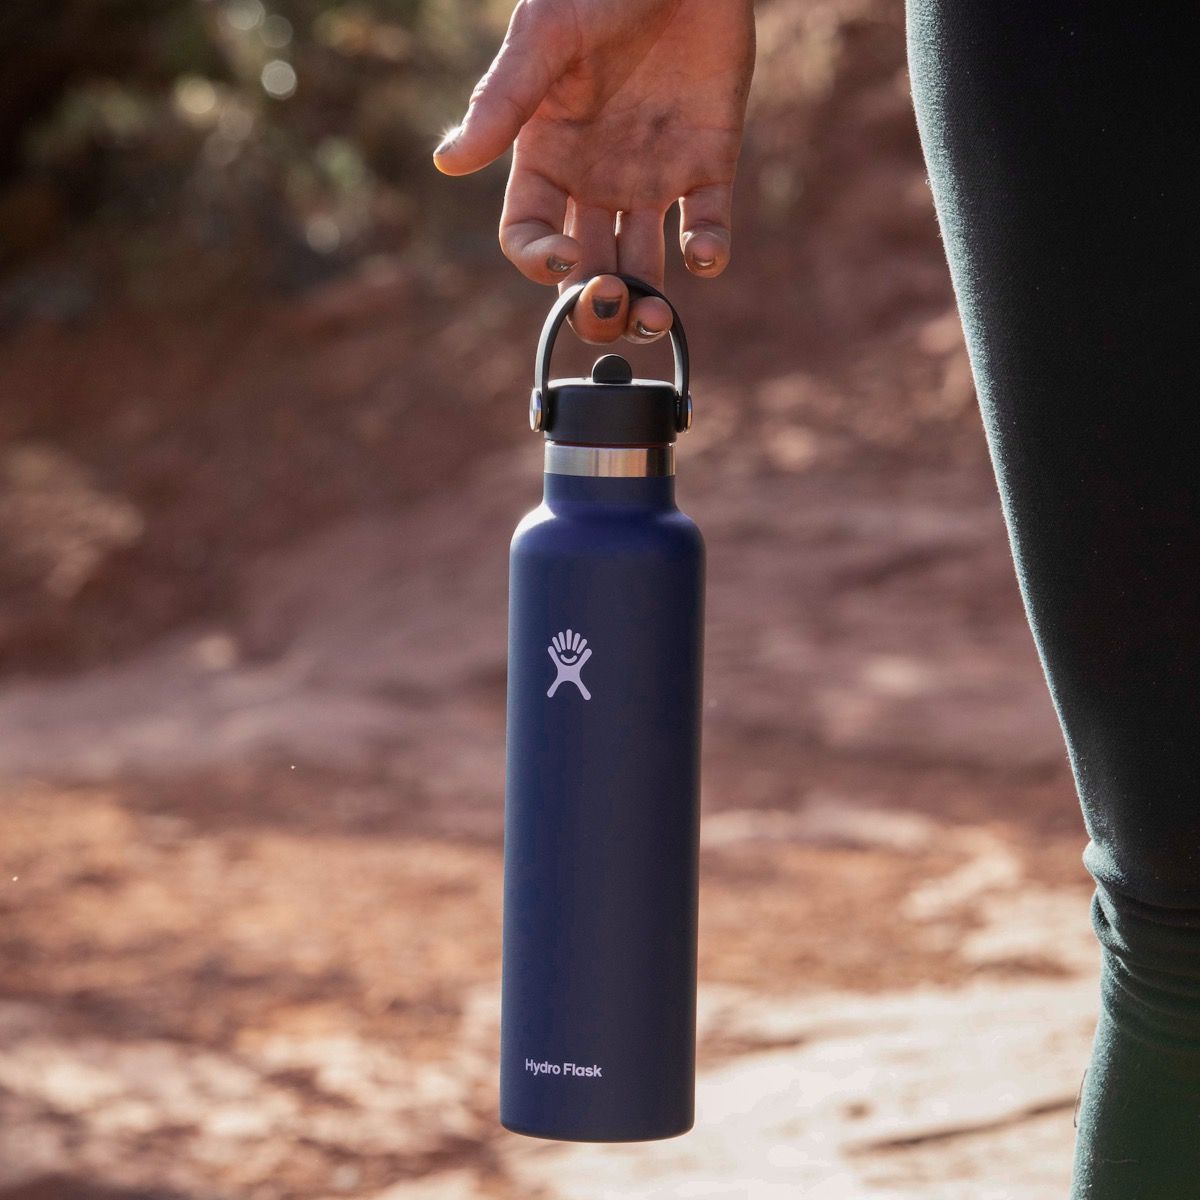 Hydro Flask Water Bottles for sale in Frenchtown, New Jersey